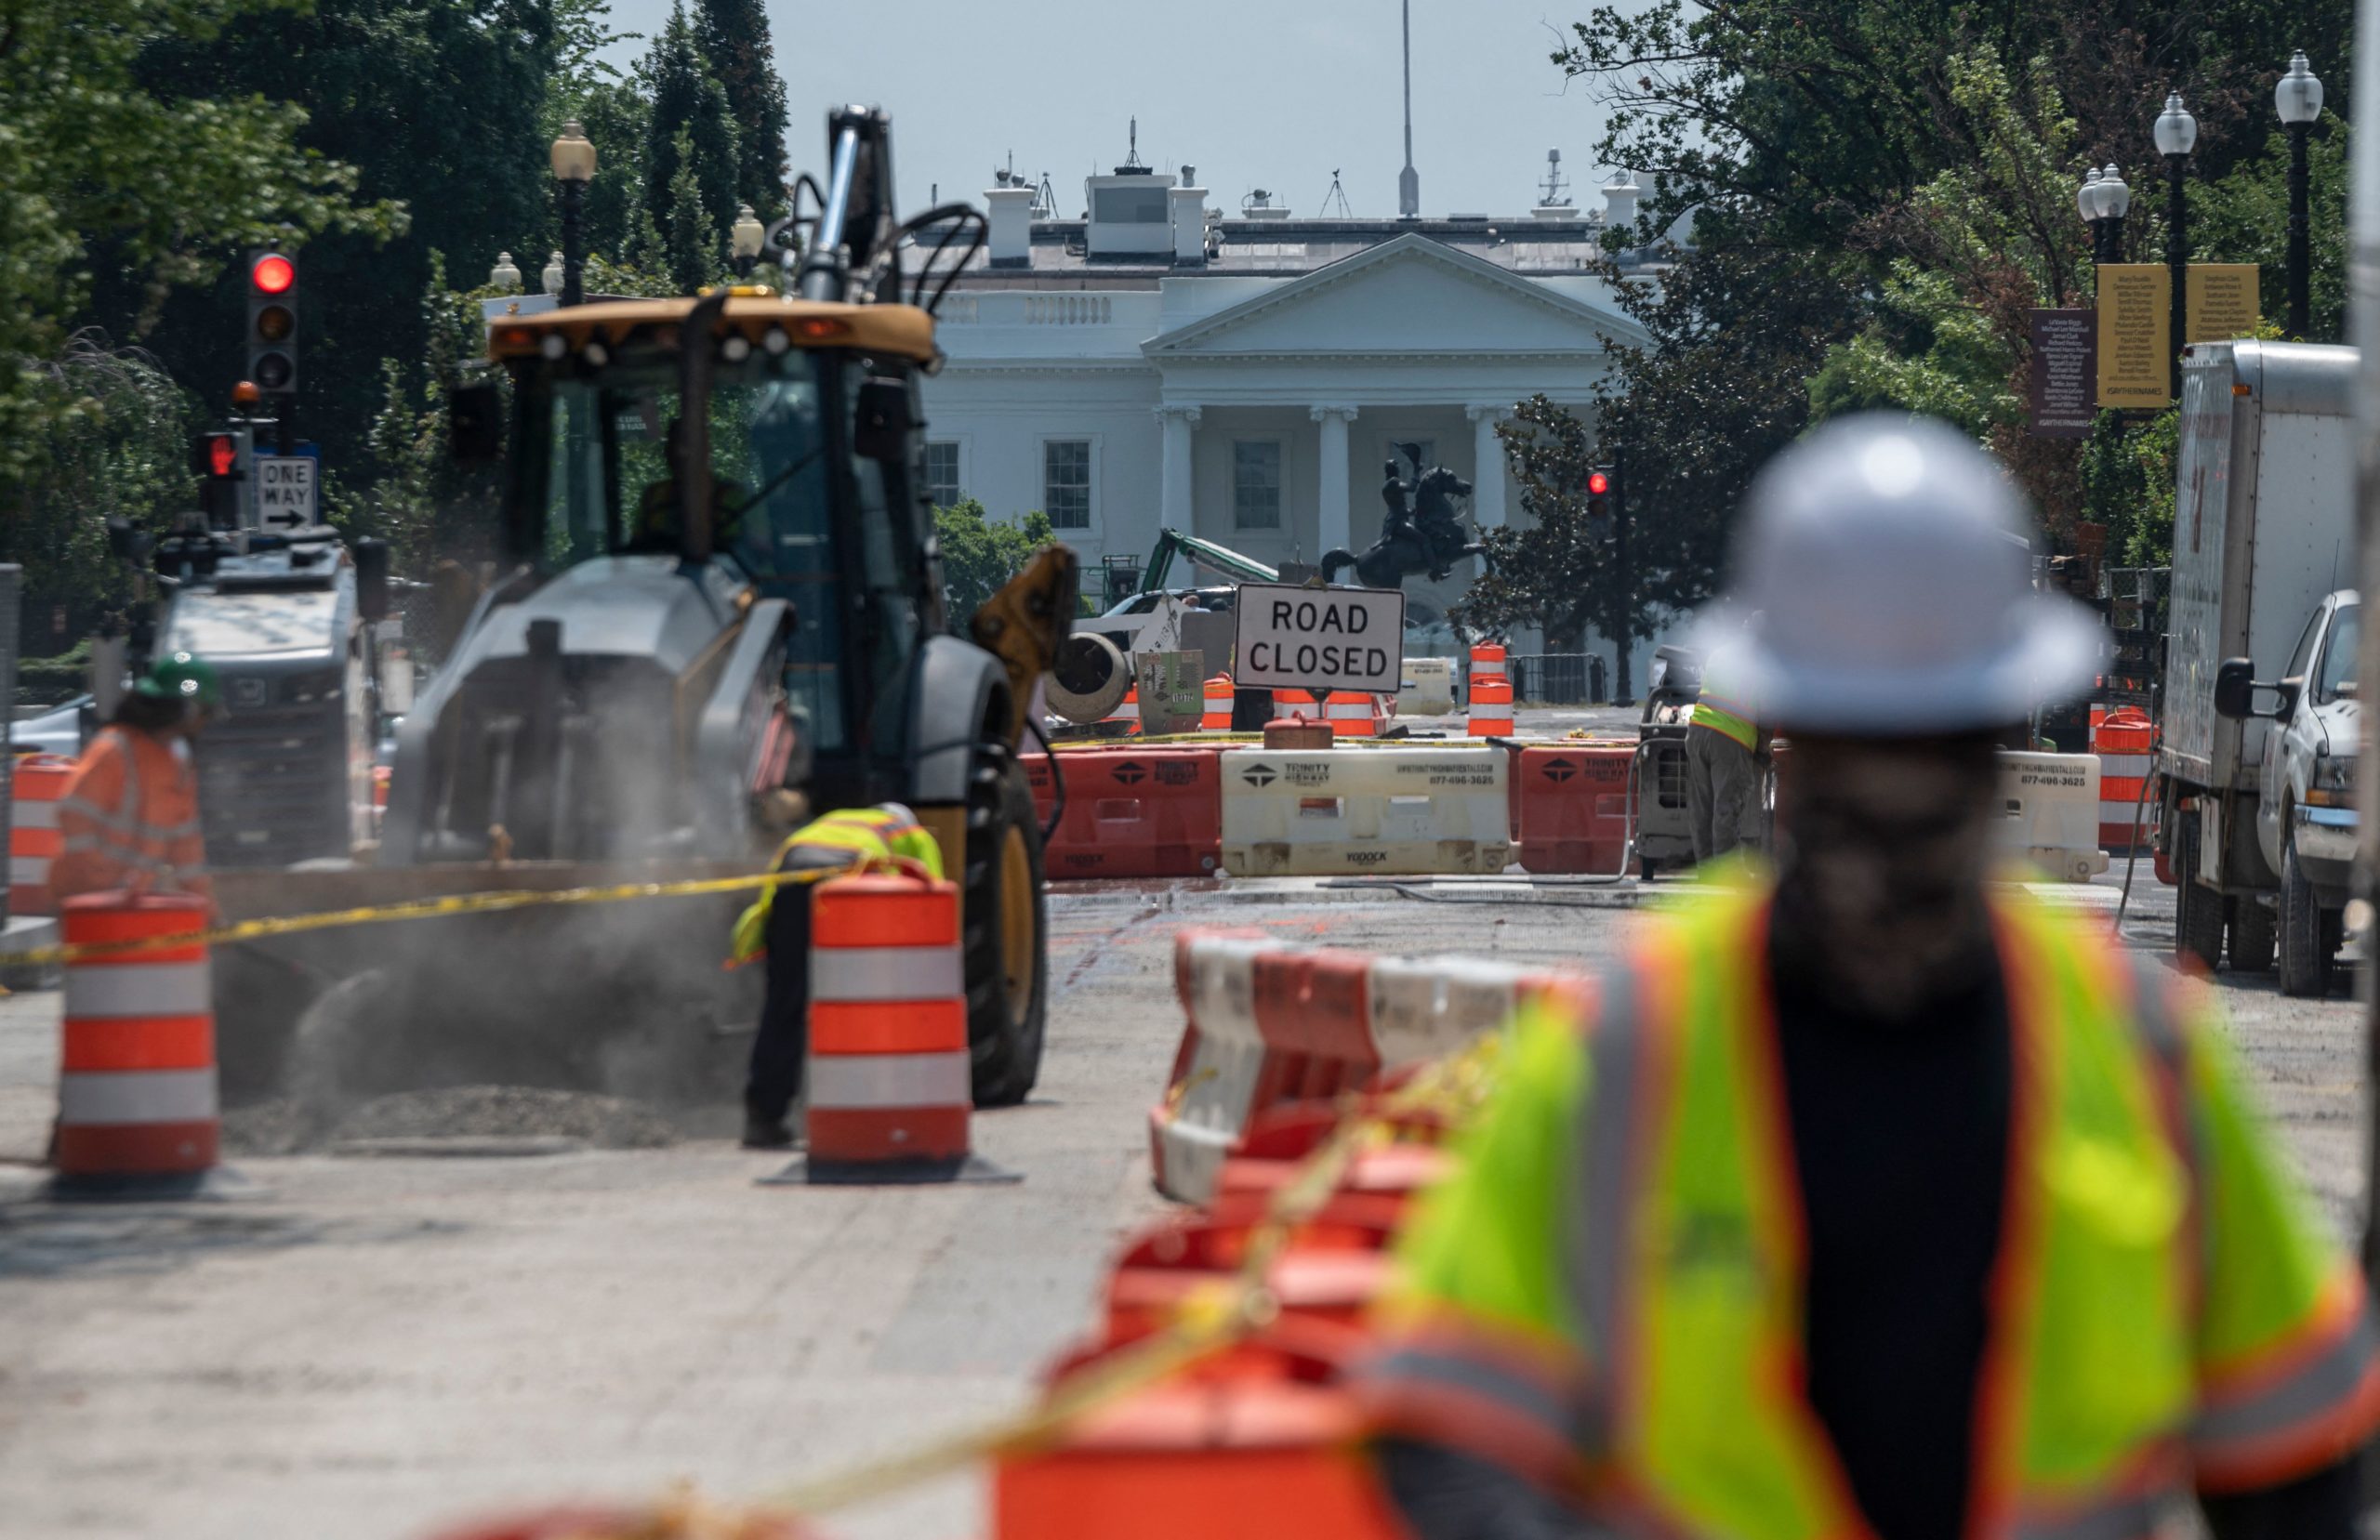 Construction workers repair a street near the White House in Washington, D.C. on Aug. 10. (Andrew Caballero-Reynolds/AFP via Getty Images)